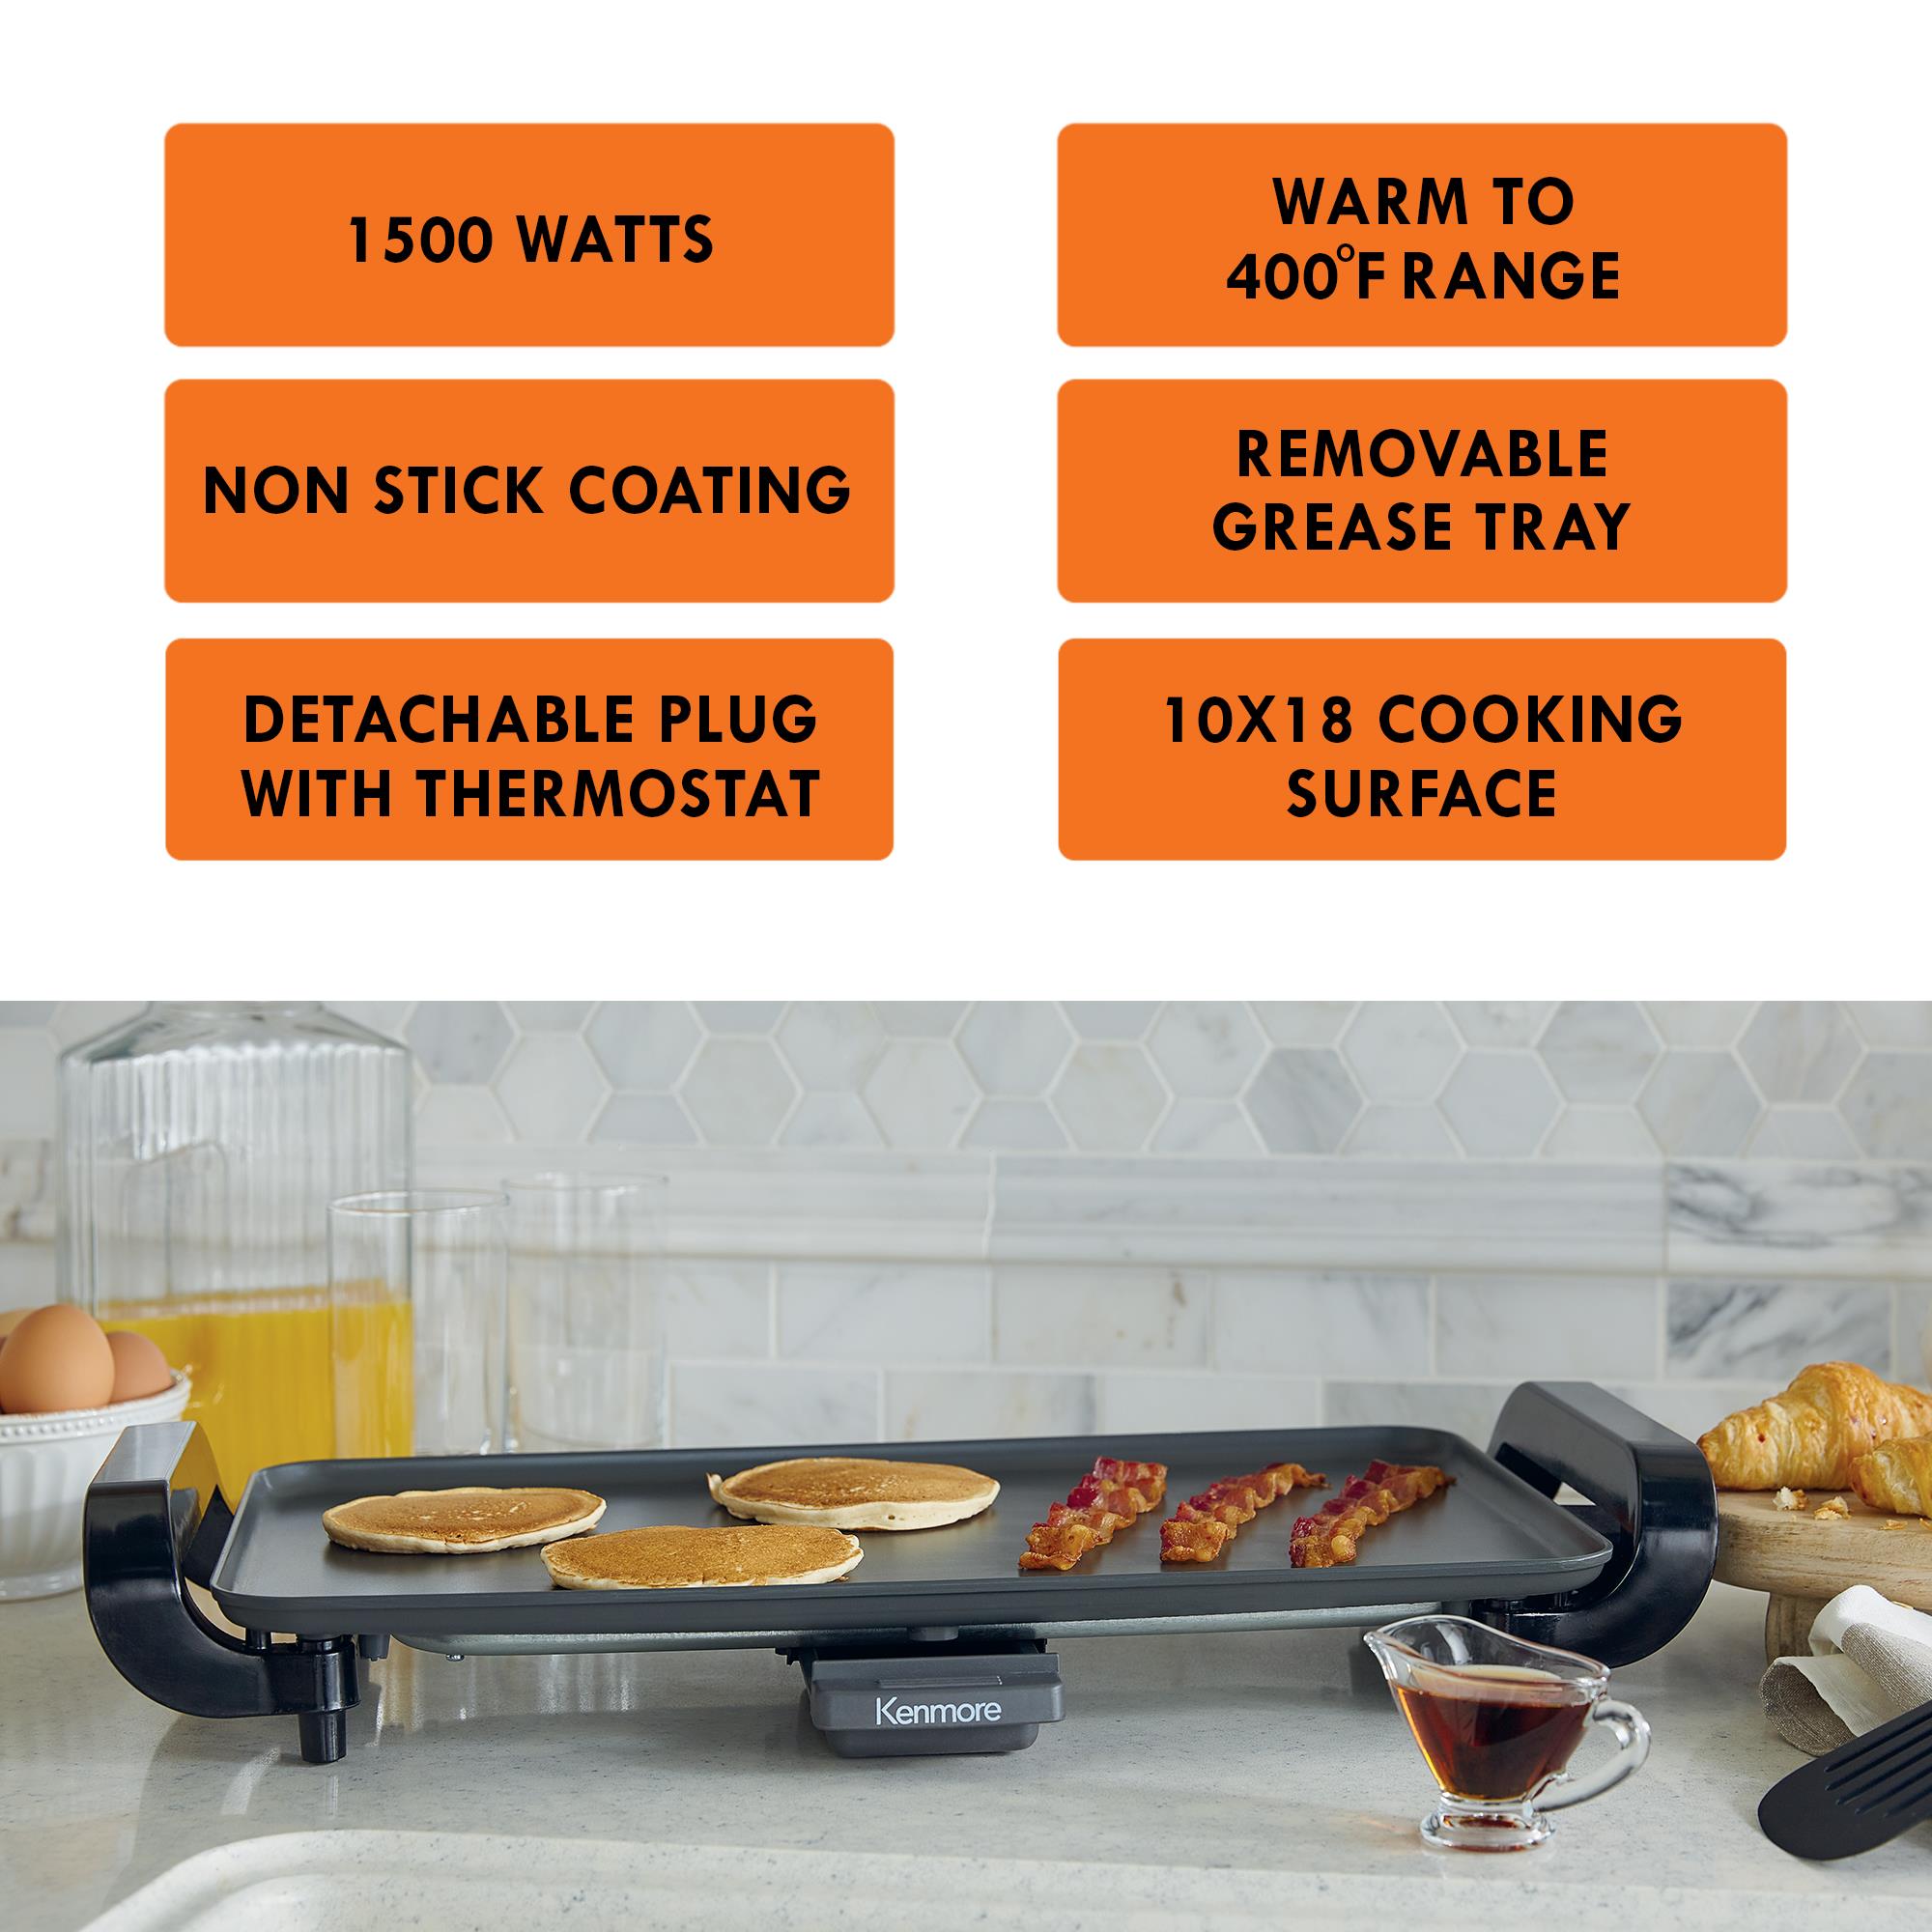 DASH Everyday Nonstick Deluxe Electric Griddle with Removable Cooking Plate  for Pancakes, Burgers, Quesadillas, Eggs and Other Snacks, Includes Drip